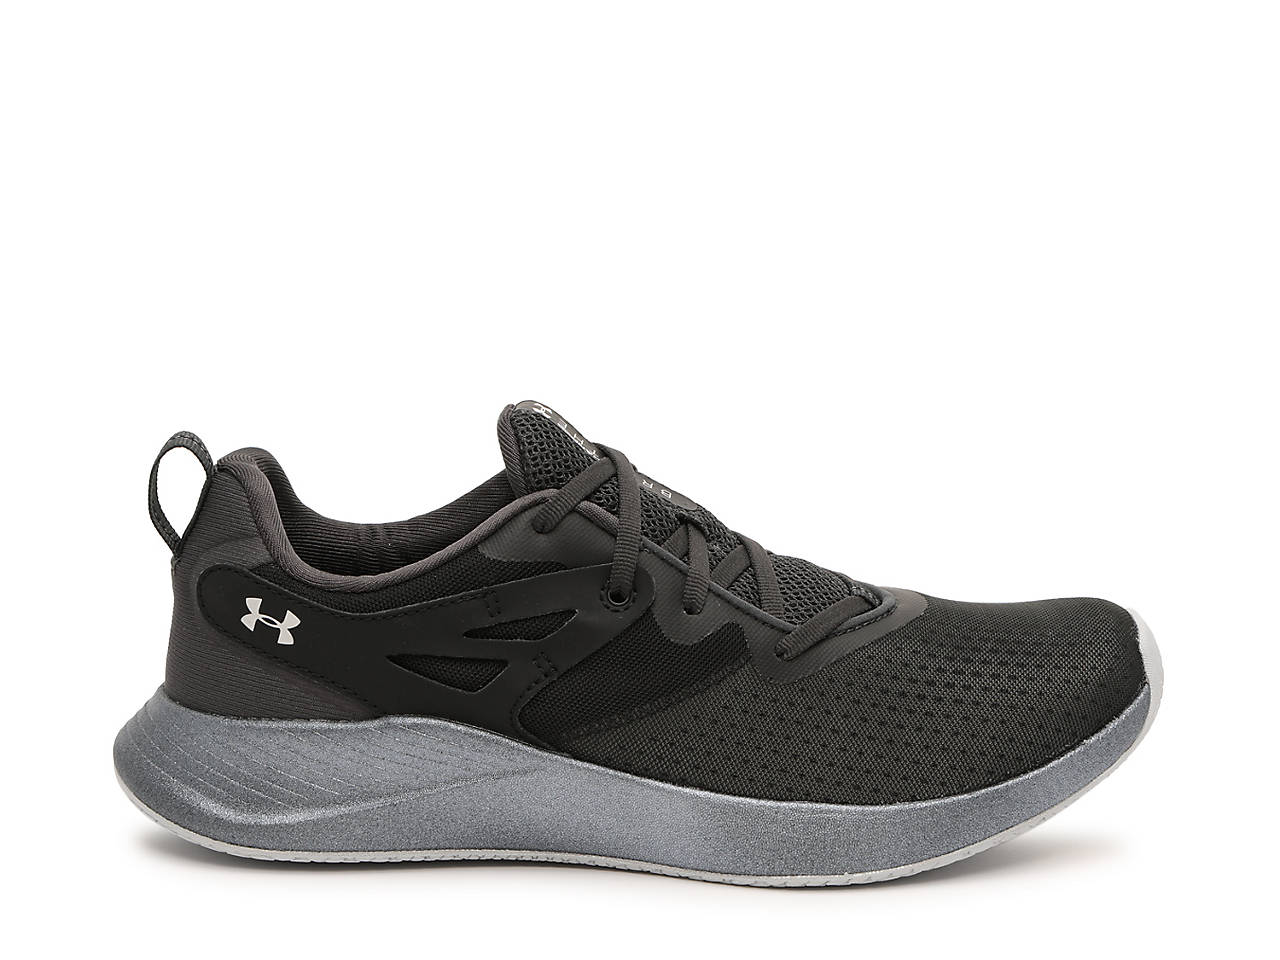 Under Armour Charged Breathe TR 2 Training Shoe - Women's Women's Shoes ...